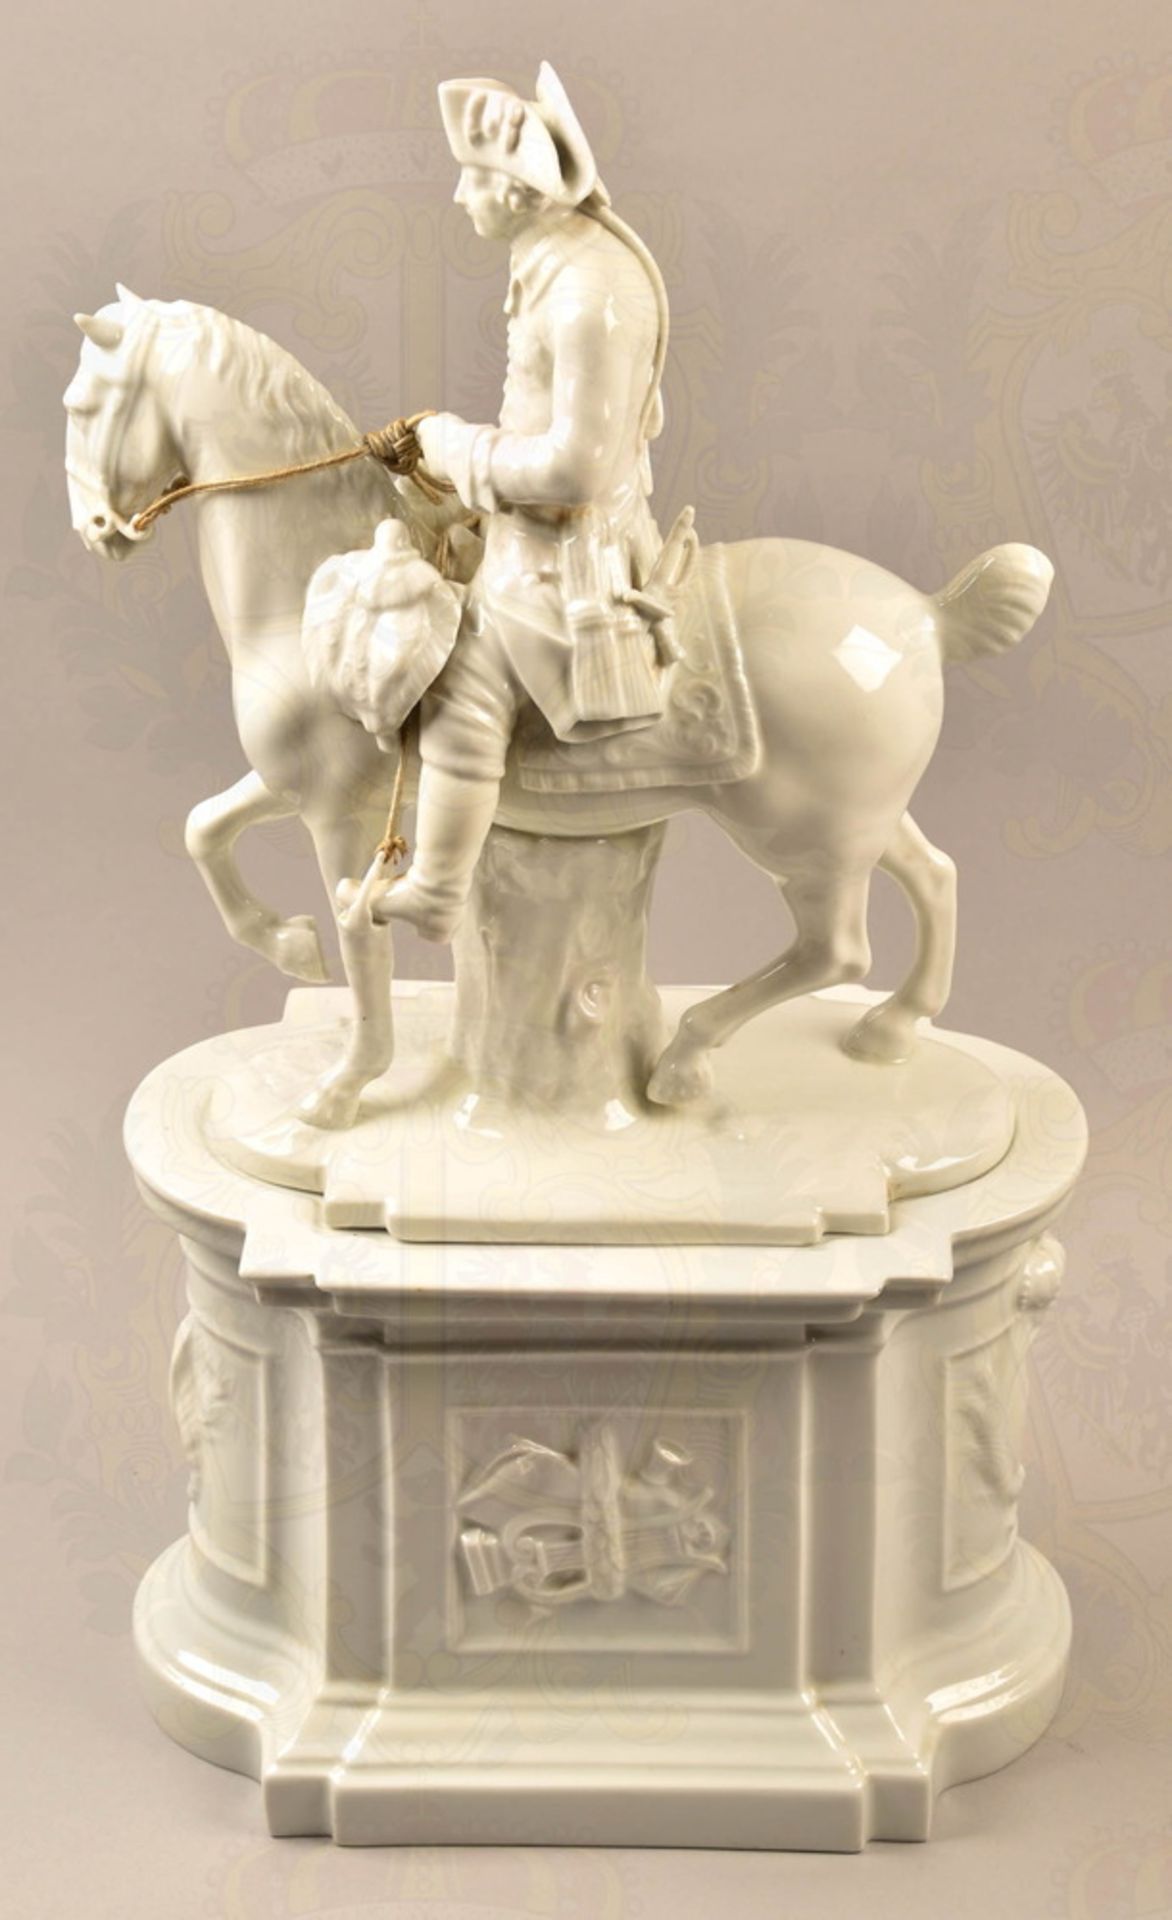 Porcelain equestrian statuette Frederick the Great - Image 3 of 6